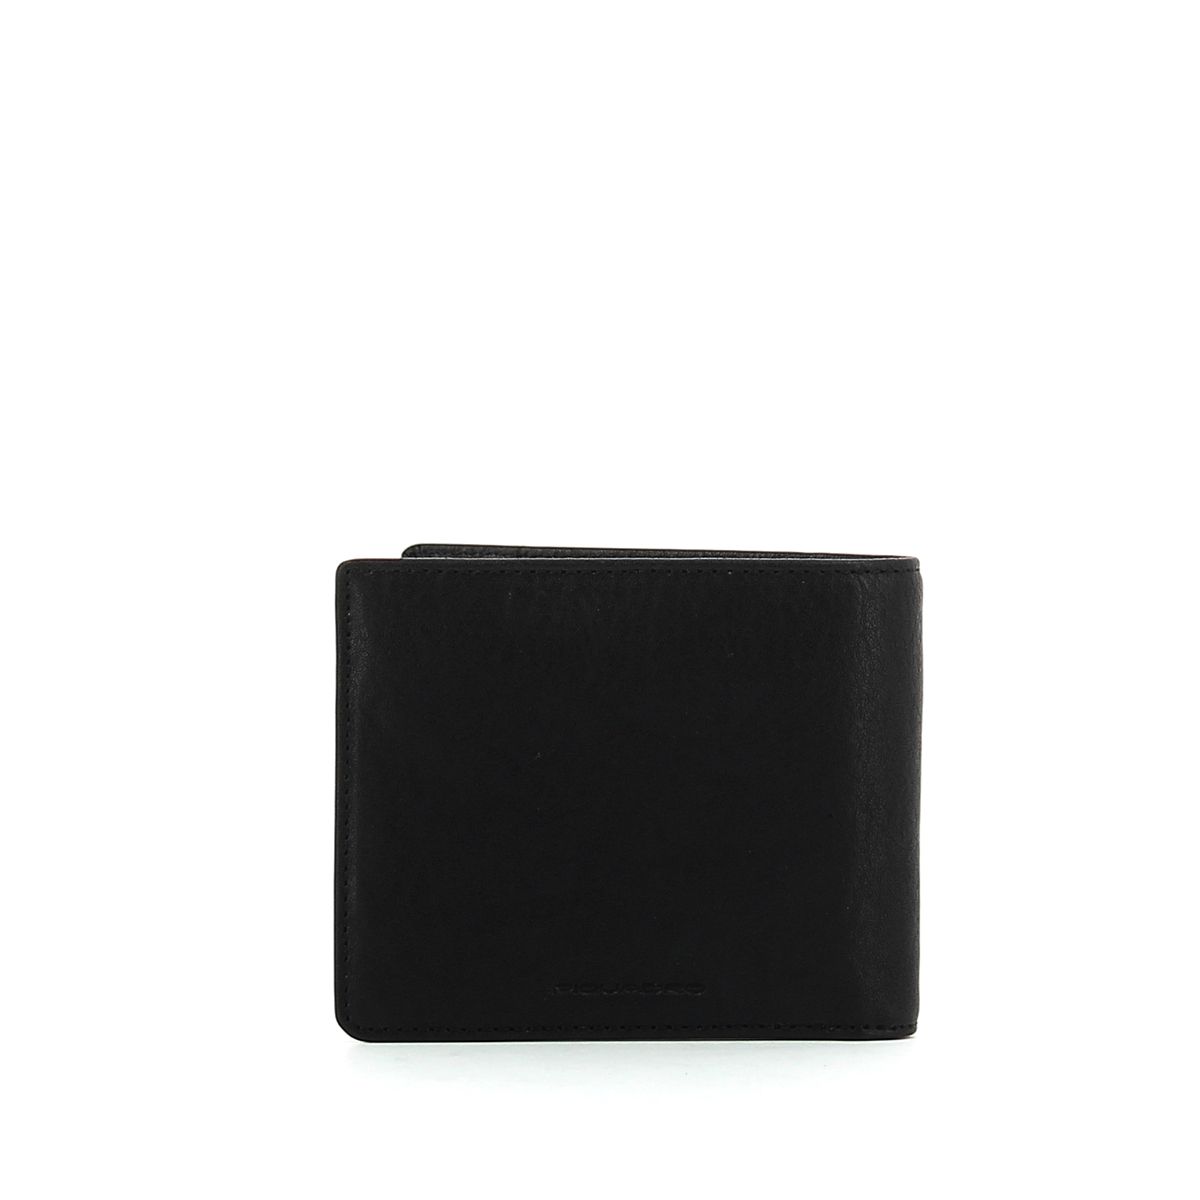 Seven compartment wallet Brief Piquadro, slim and sleek men accessory made entirely in genuine leather, with bill compartment and small logo.